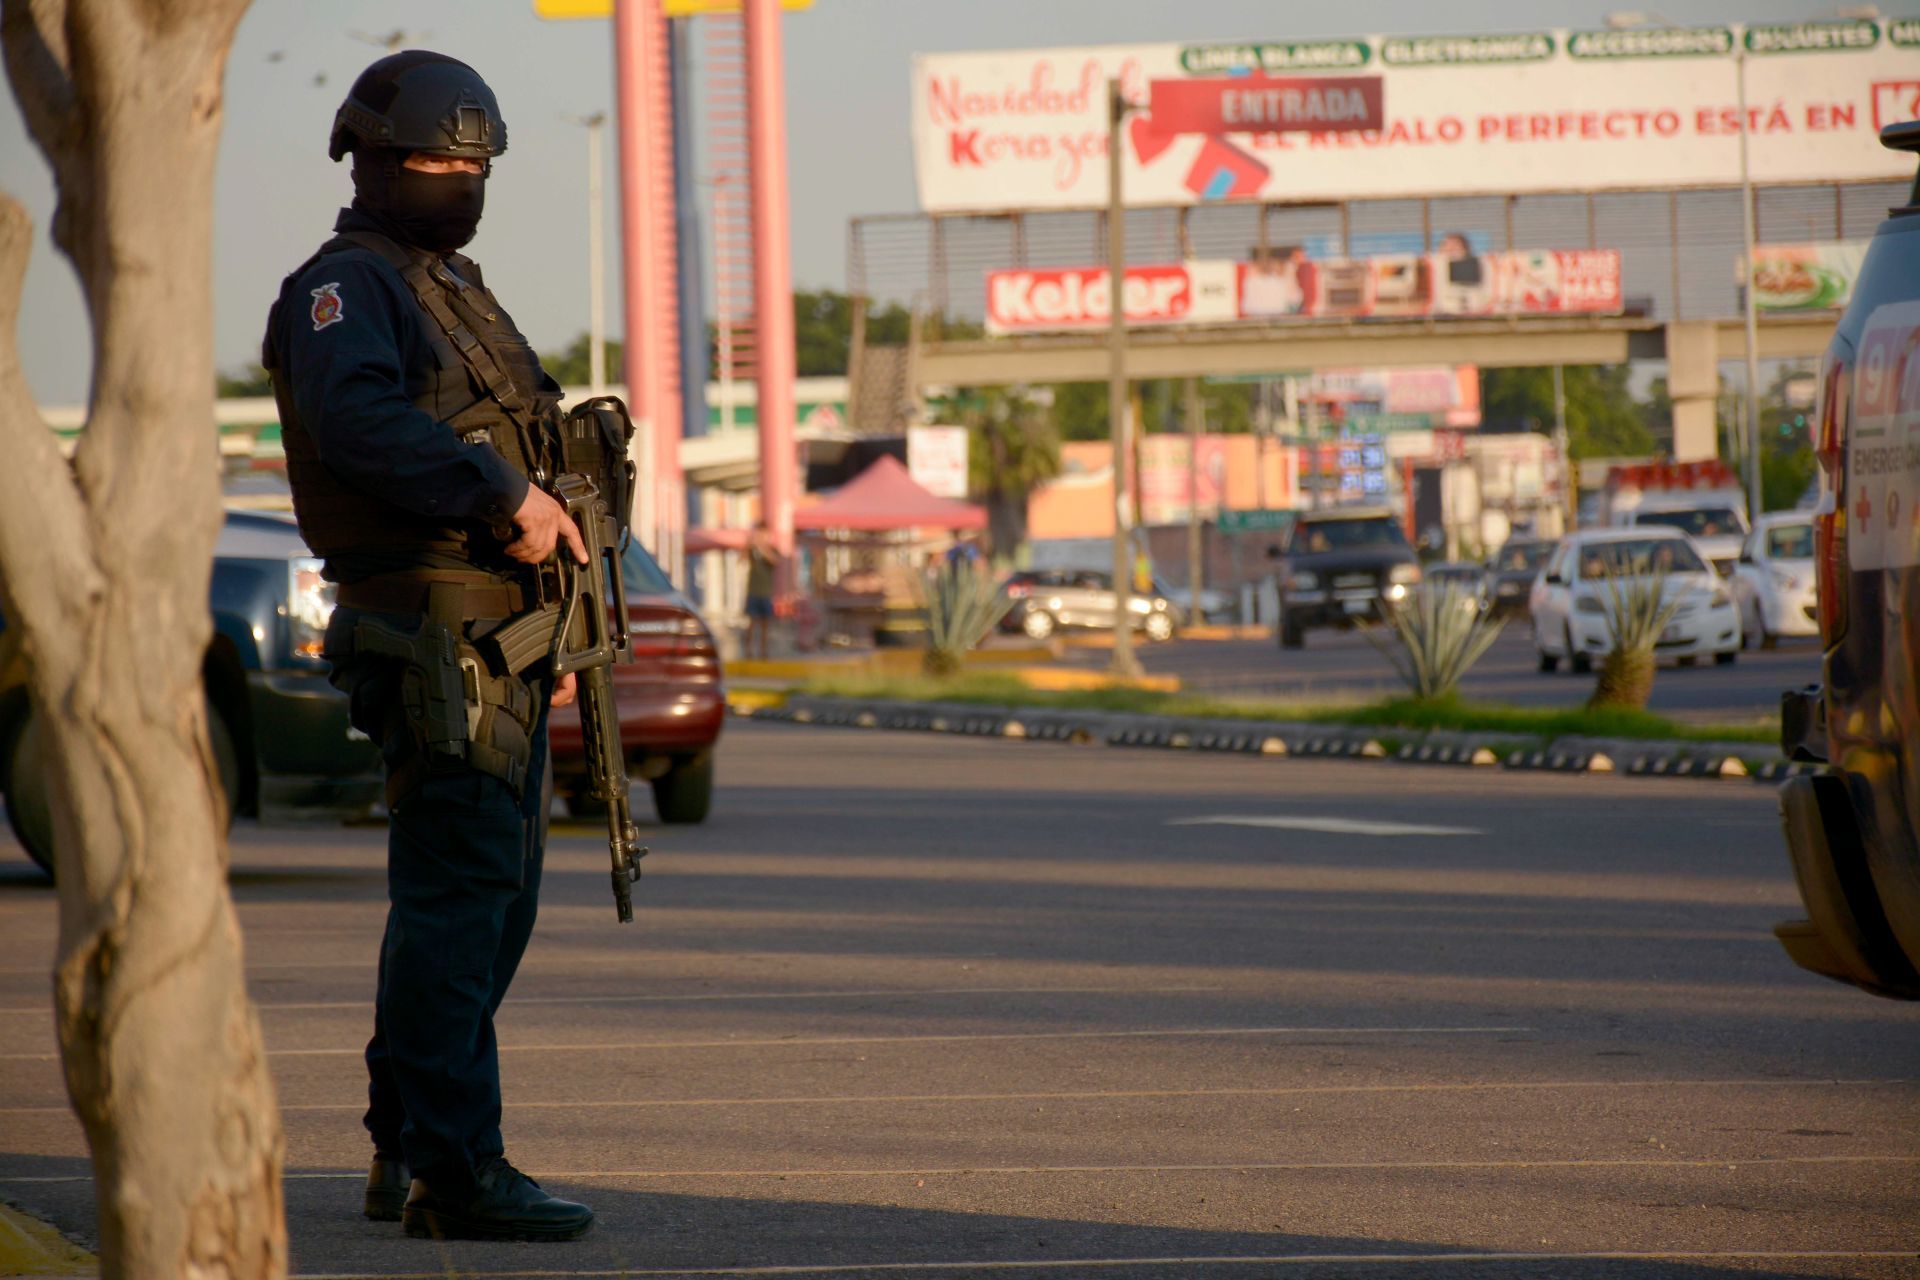 The weekend in Sinaloa was marked by intense violence (Photo: Cuartoscuro)